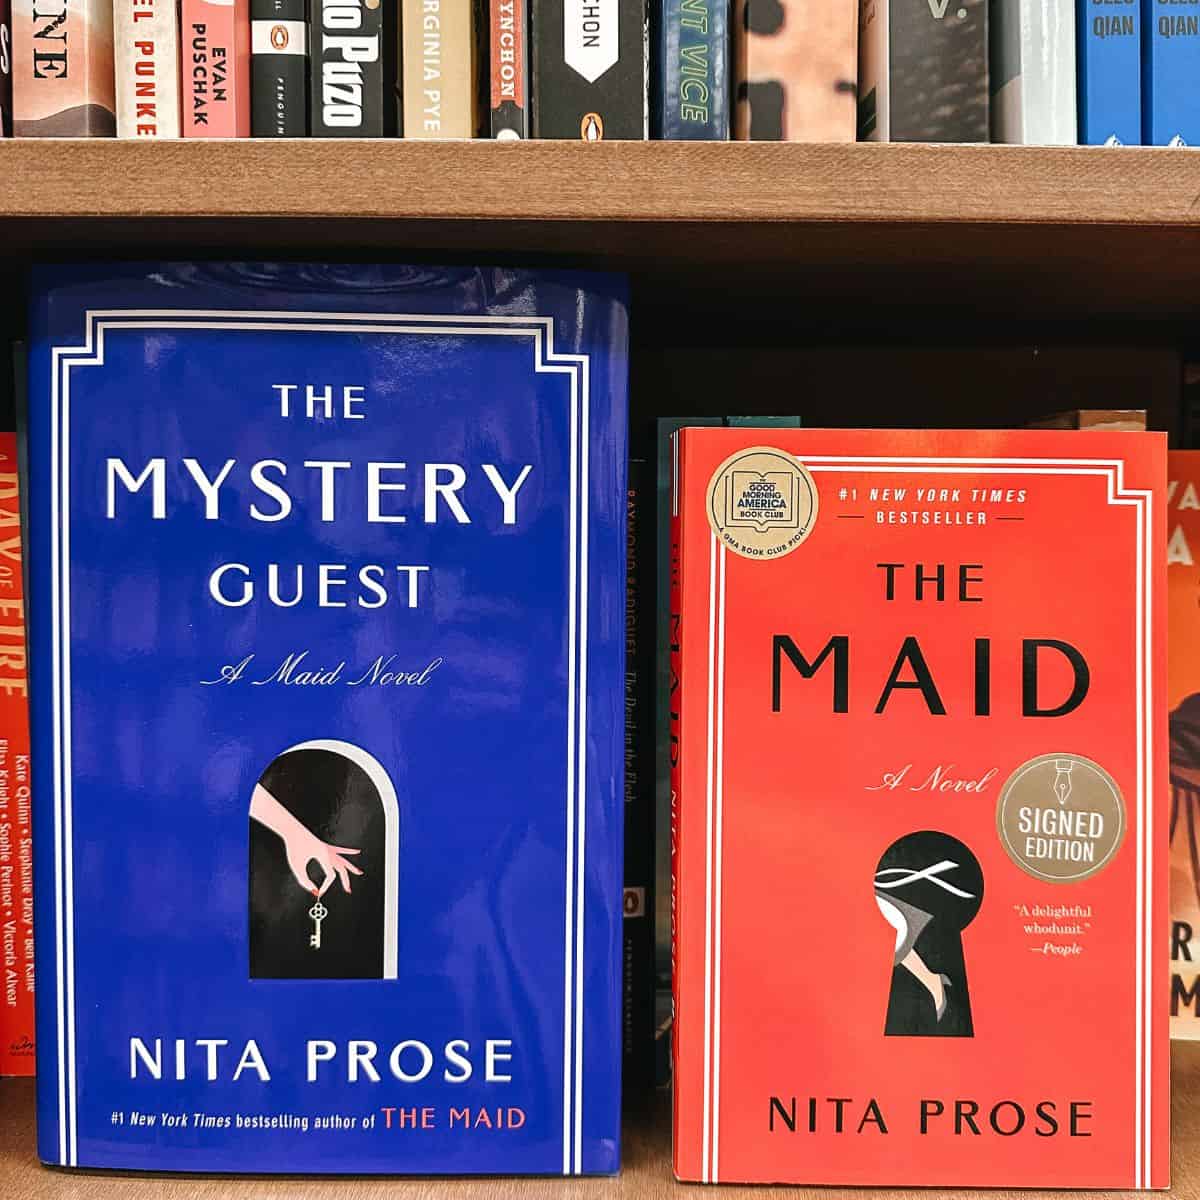 the mystery guest and the maid by nita prose in front on bookshelves.